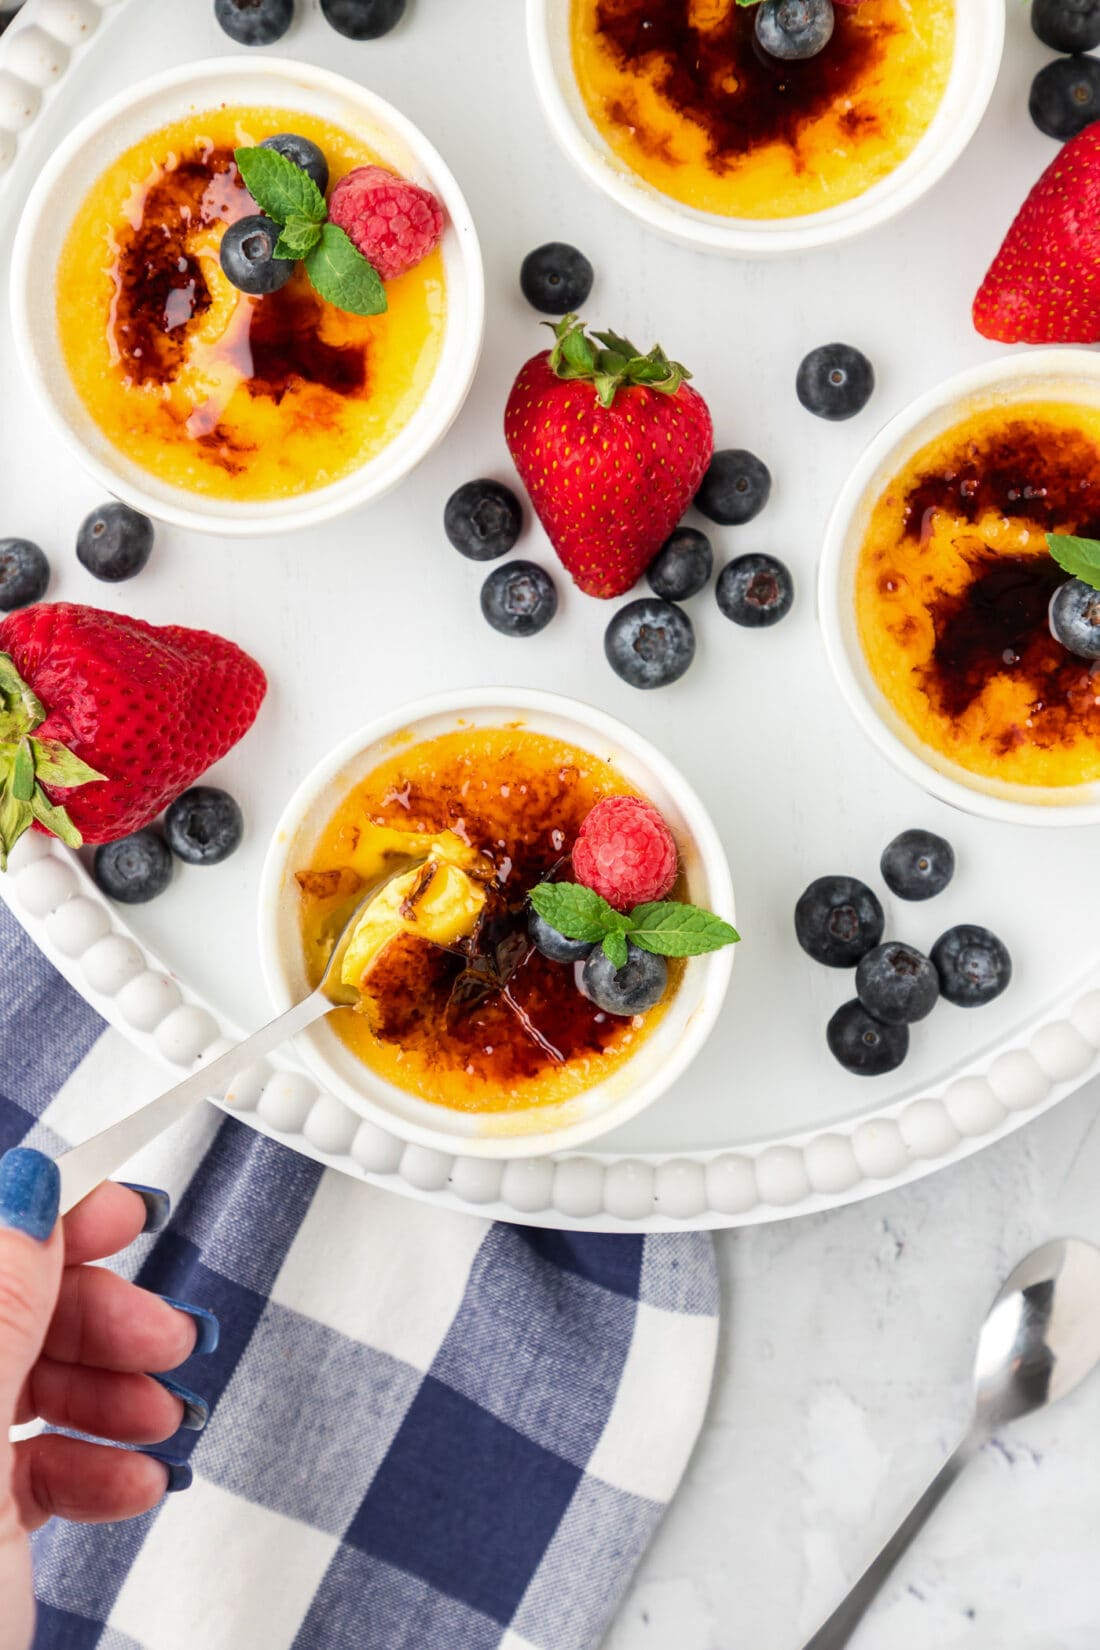 Spoon dipping into a Creme Brulee